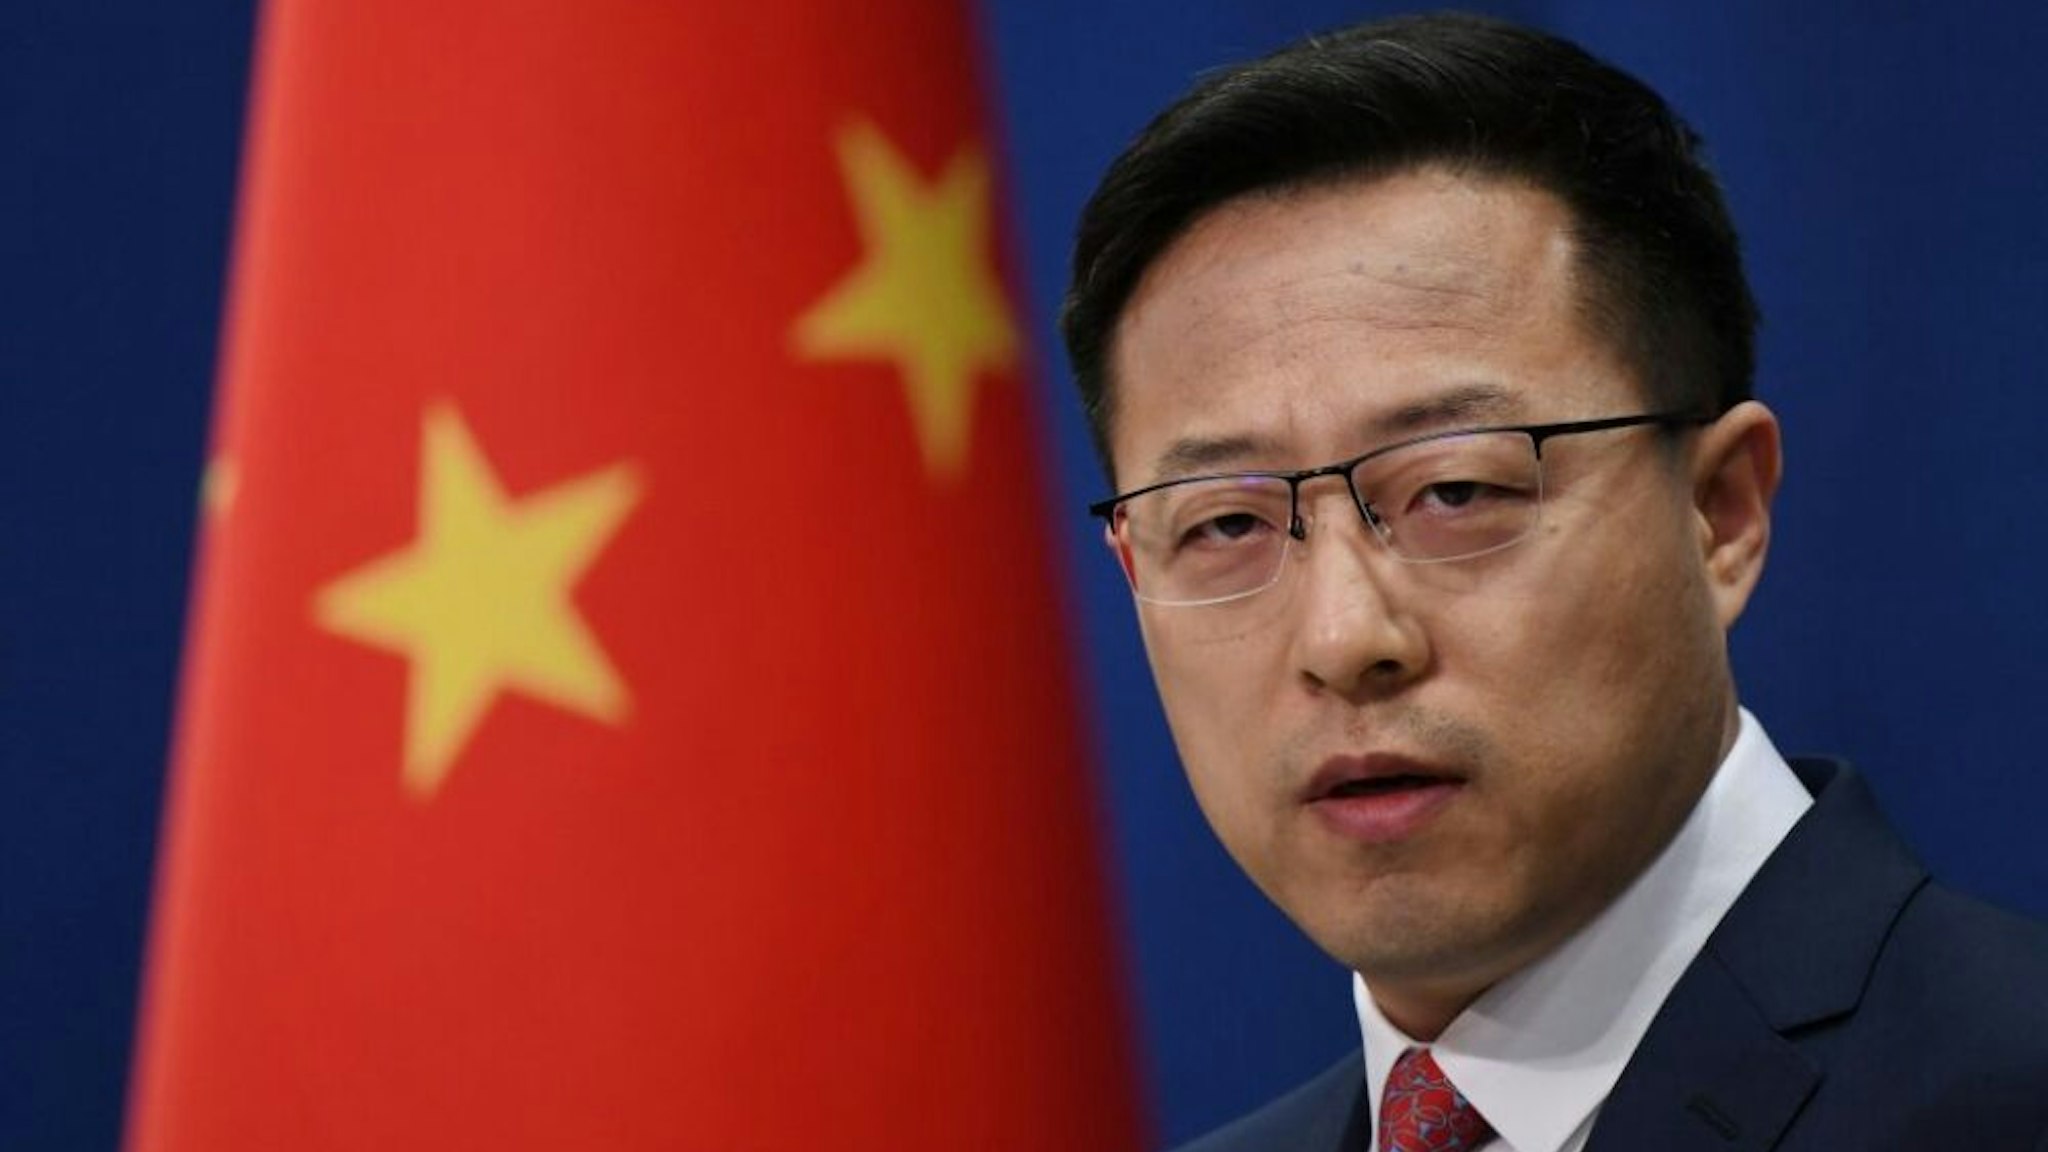 Chinese Foreign Ministry spokesman Zhao Lijian speaks at the daily media briefing in Beijing on April 8, 2020.